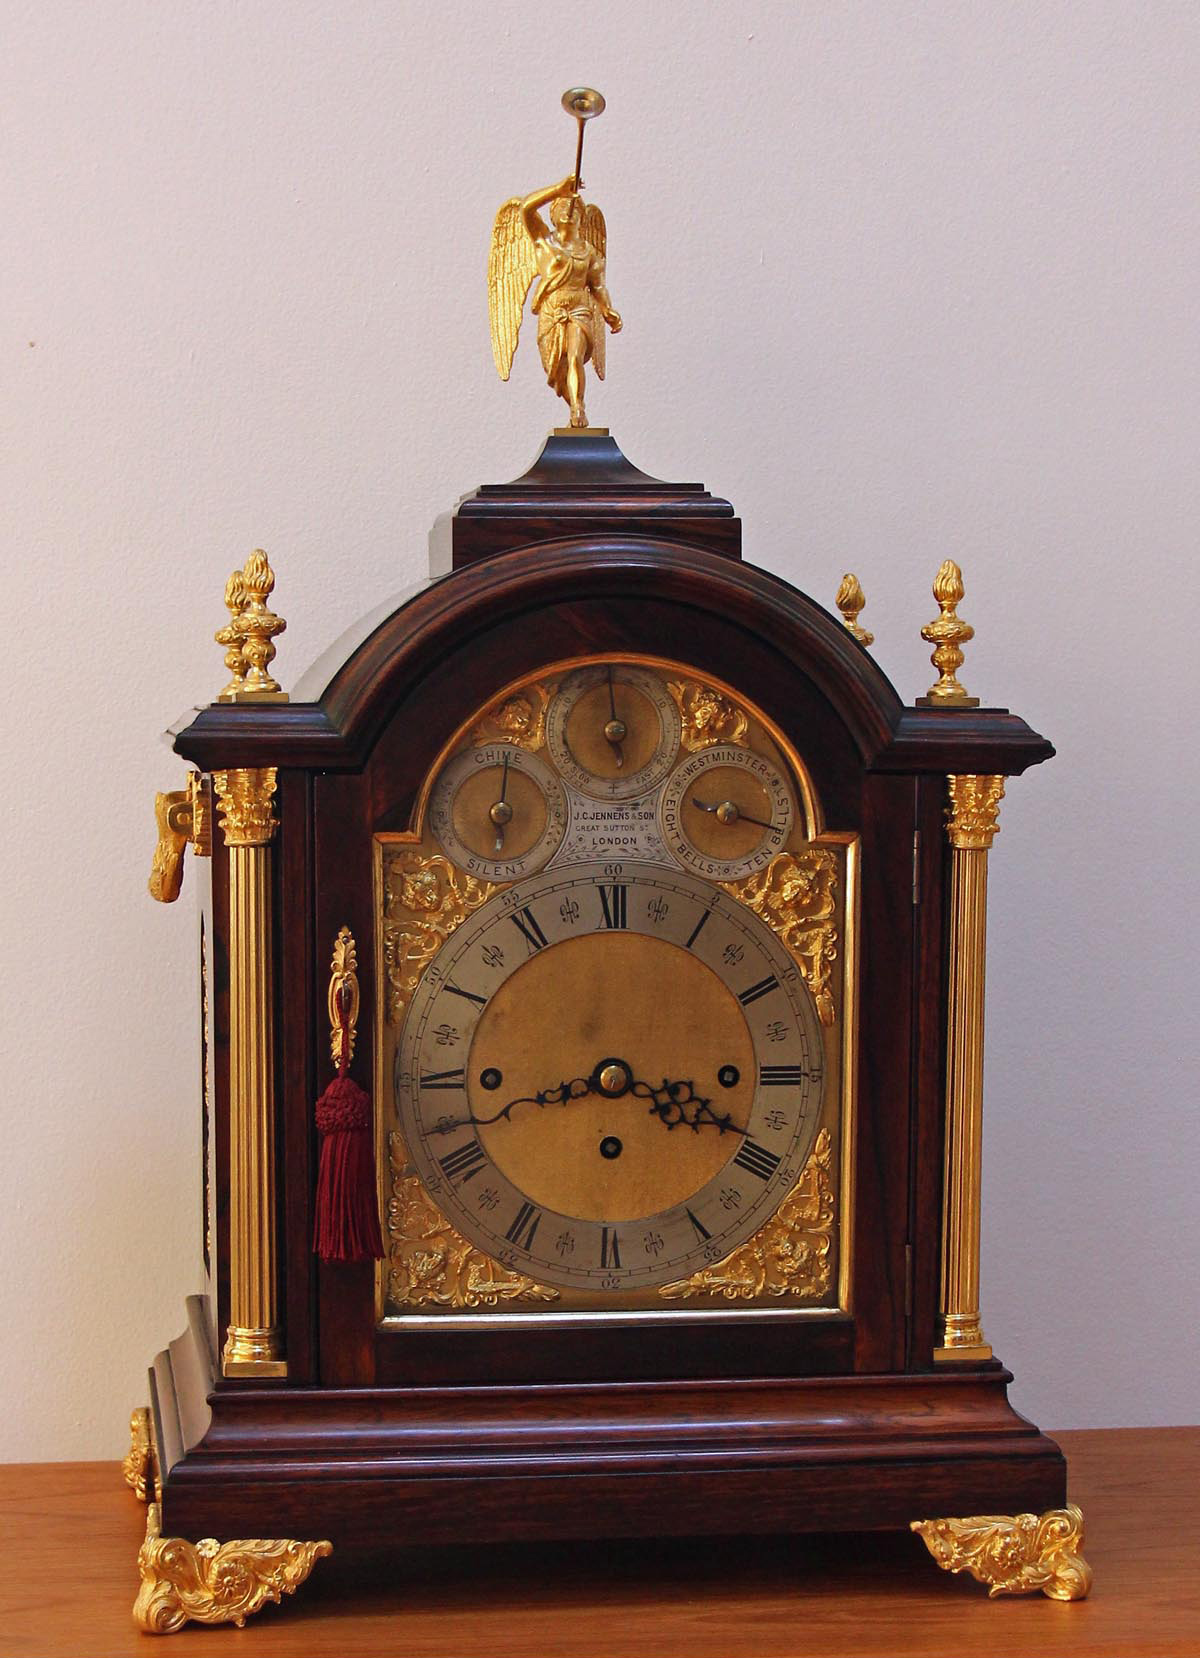 J.C. Jennens & Son 10 Bell Triple Fusee Bracket Clock - Simply Magnificent!